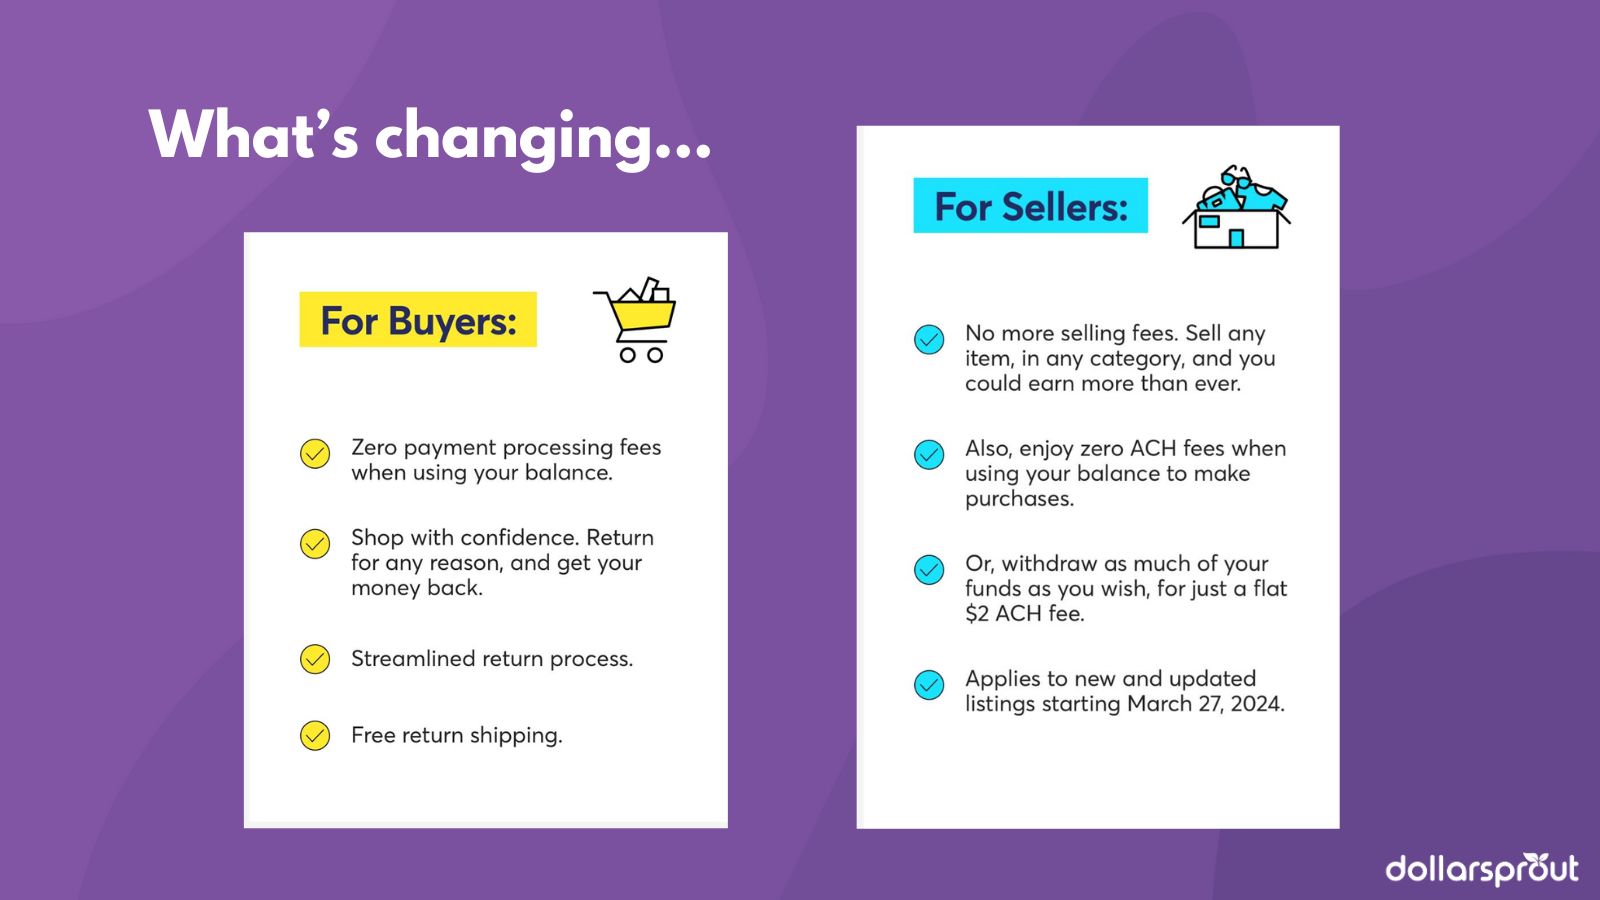 visual comparing the different between mercari's old and new seller fee system based on their announcement